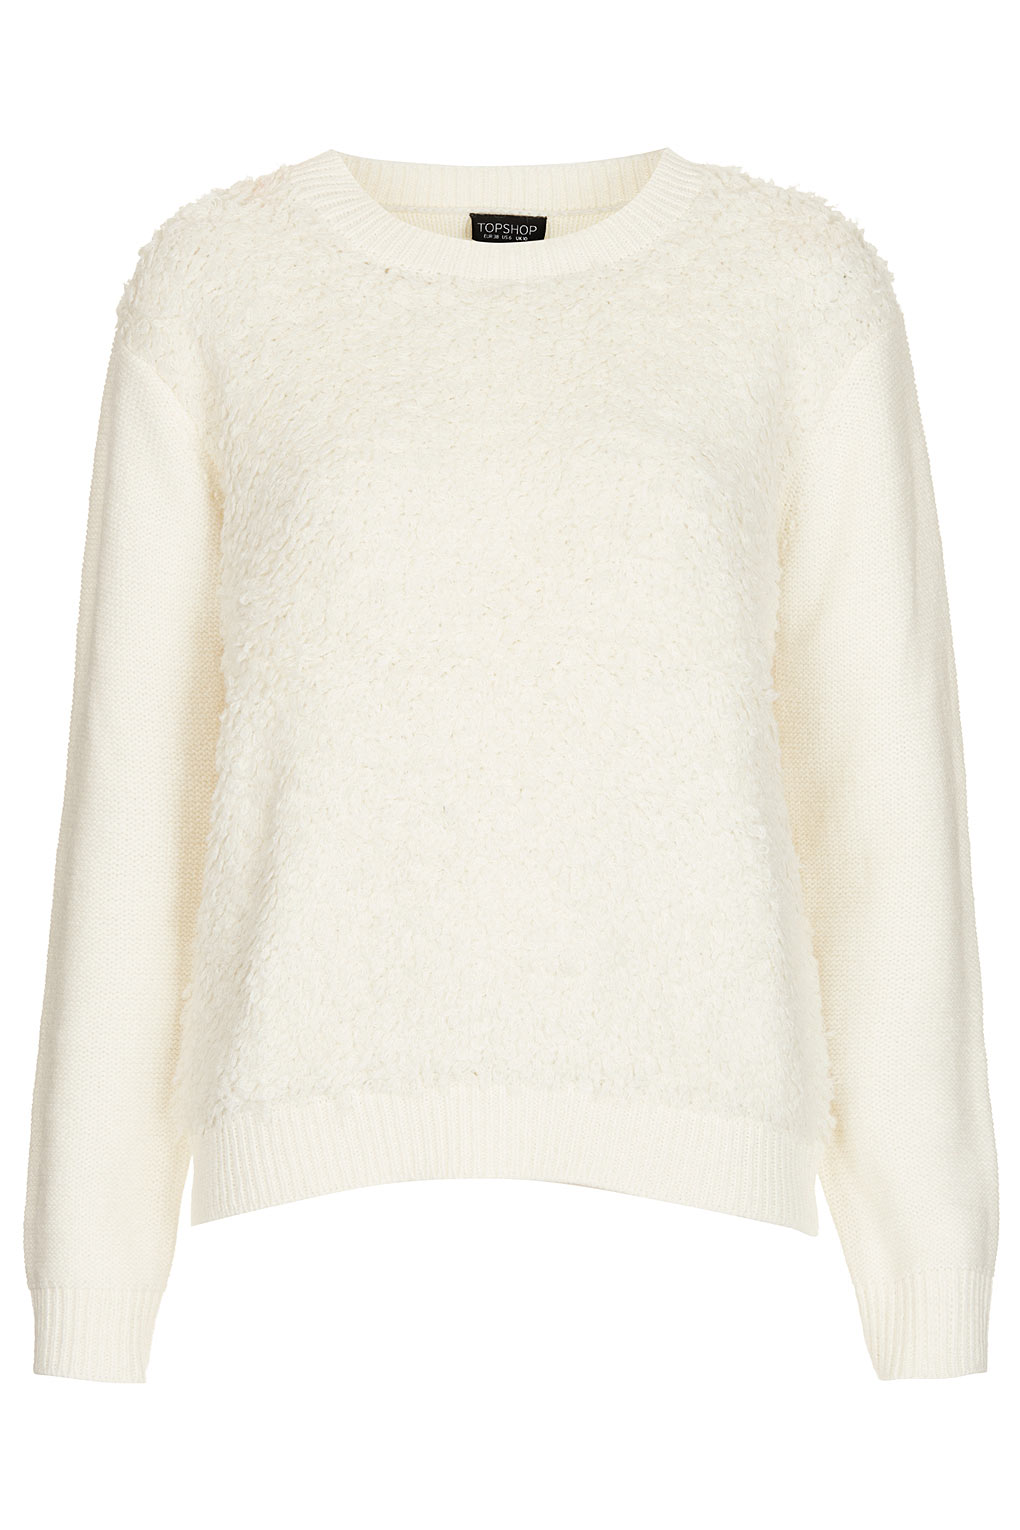 Lyst - Topshop Knitted Loopy Stitch Jumper in White